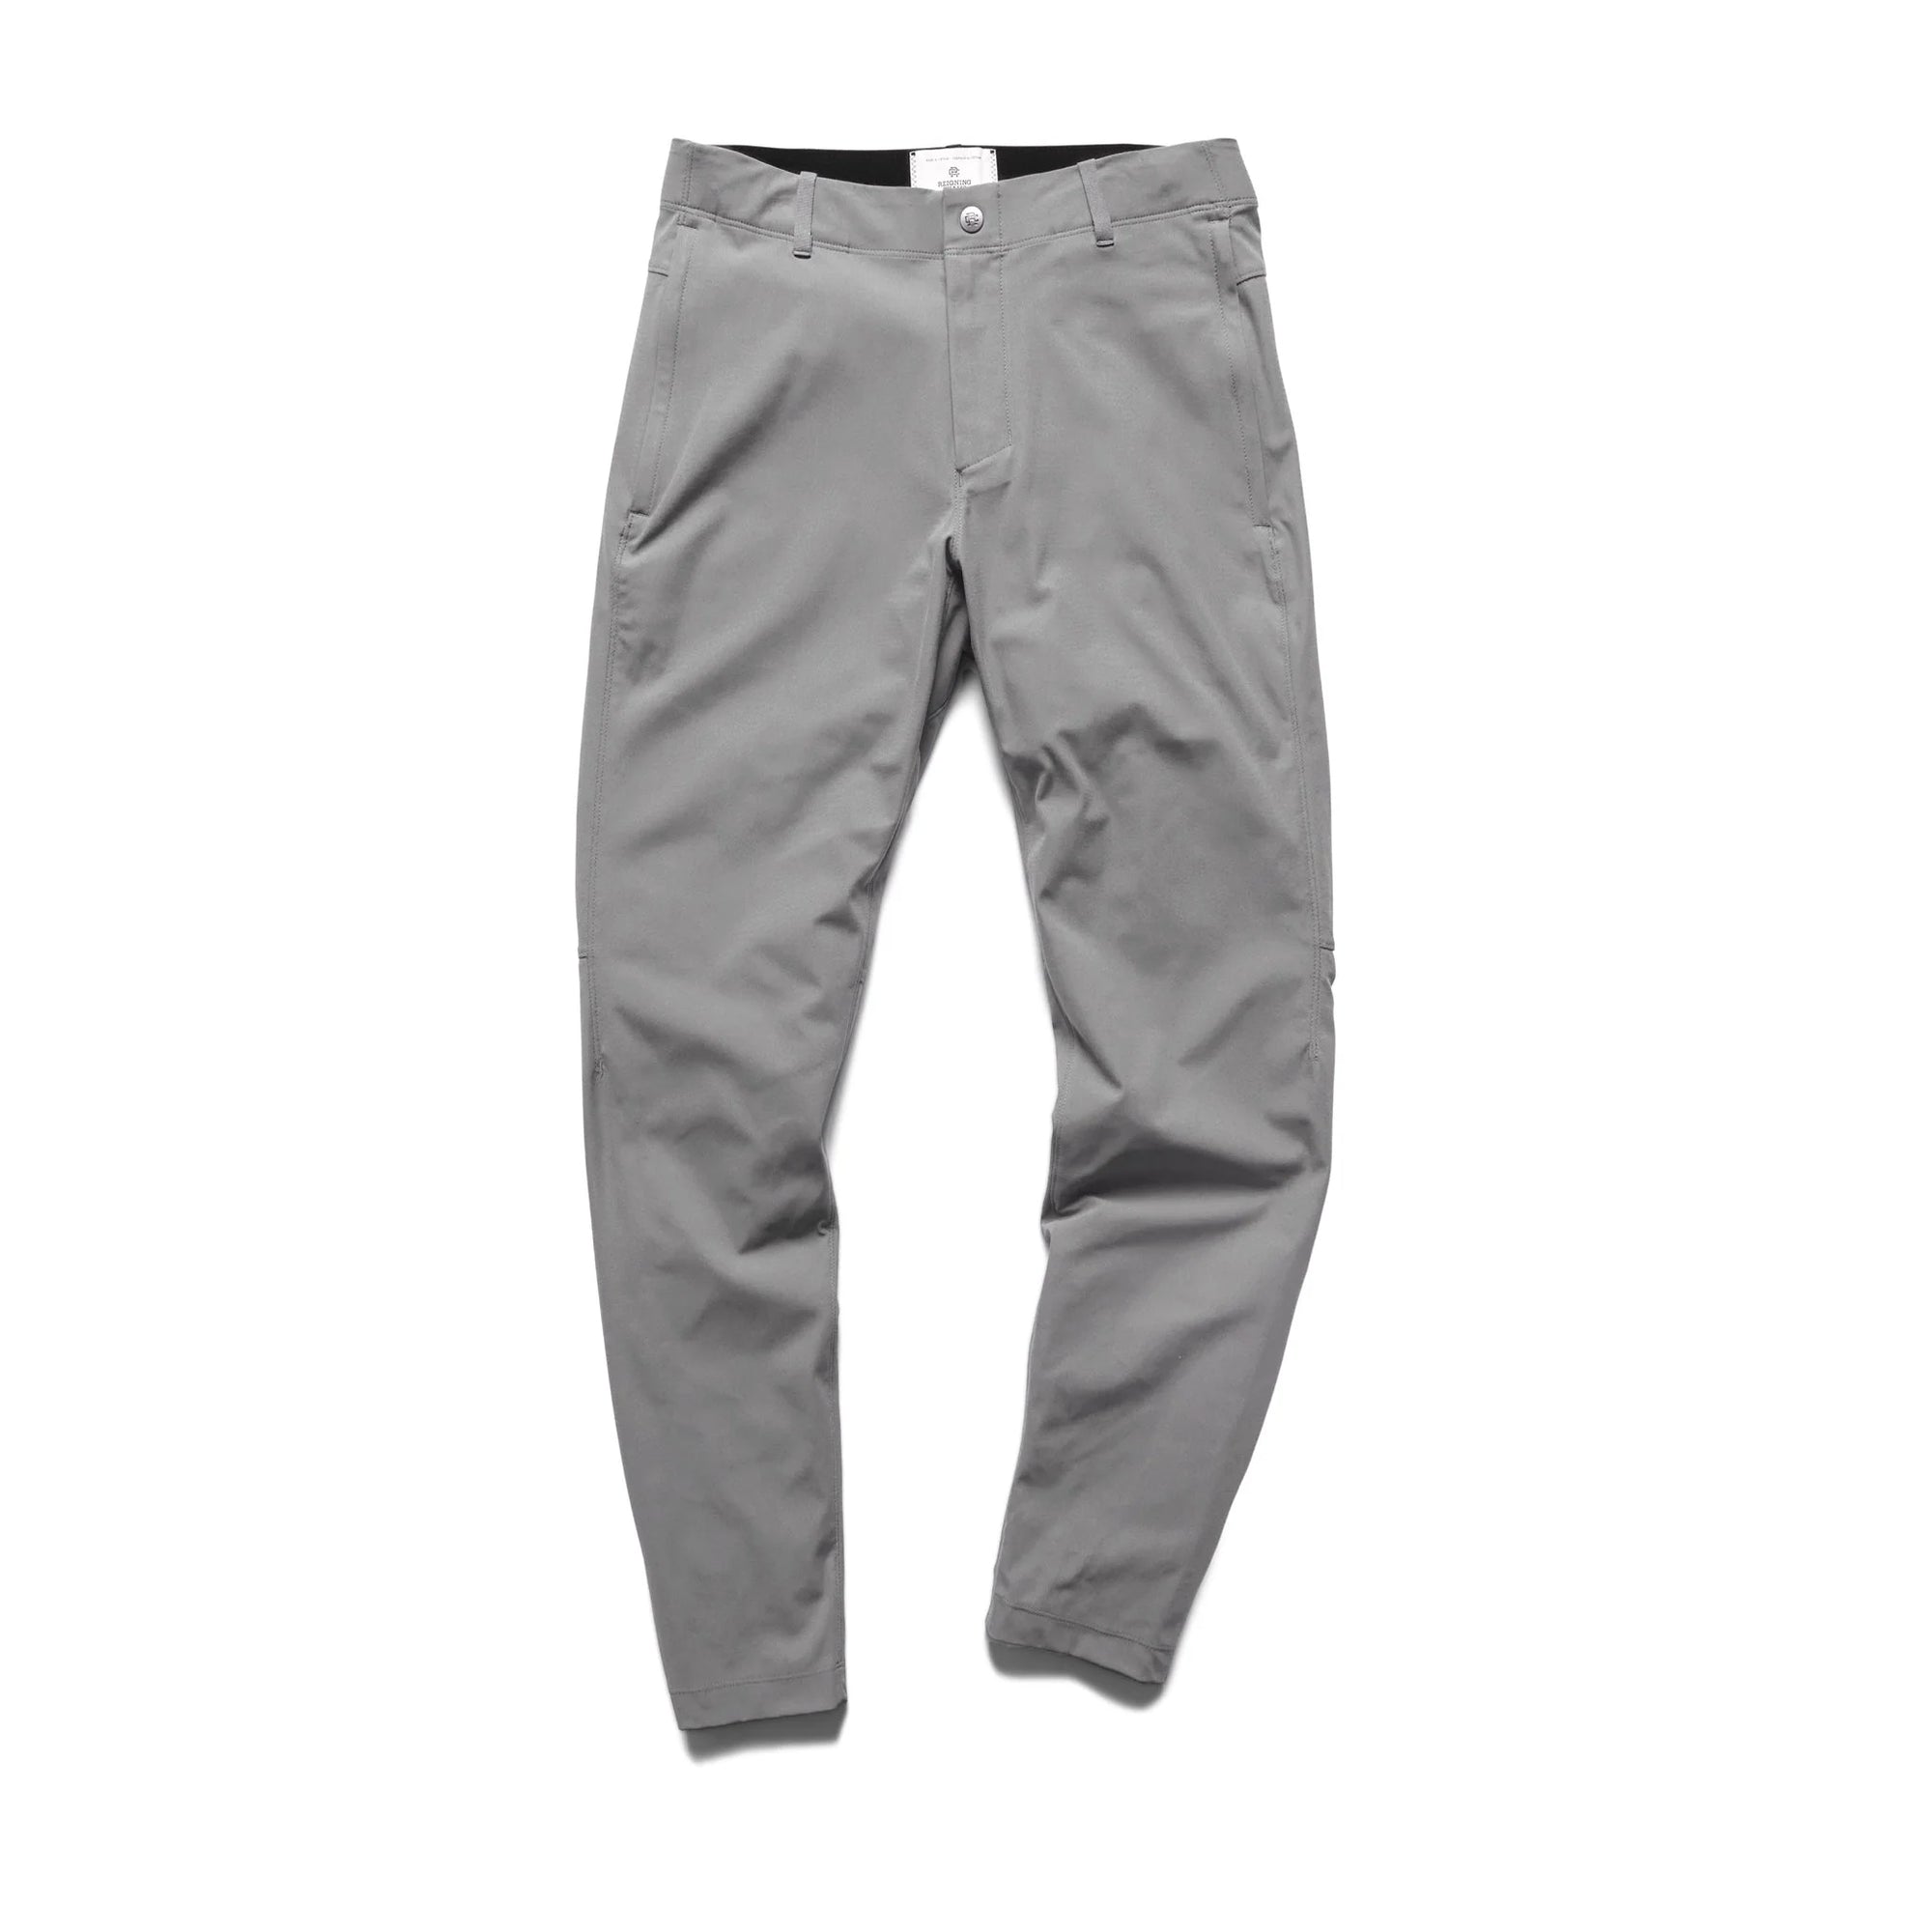 Reigning Champ Coach's Pant in Stone